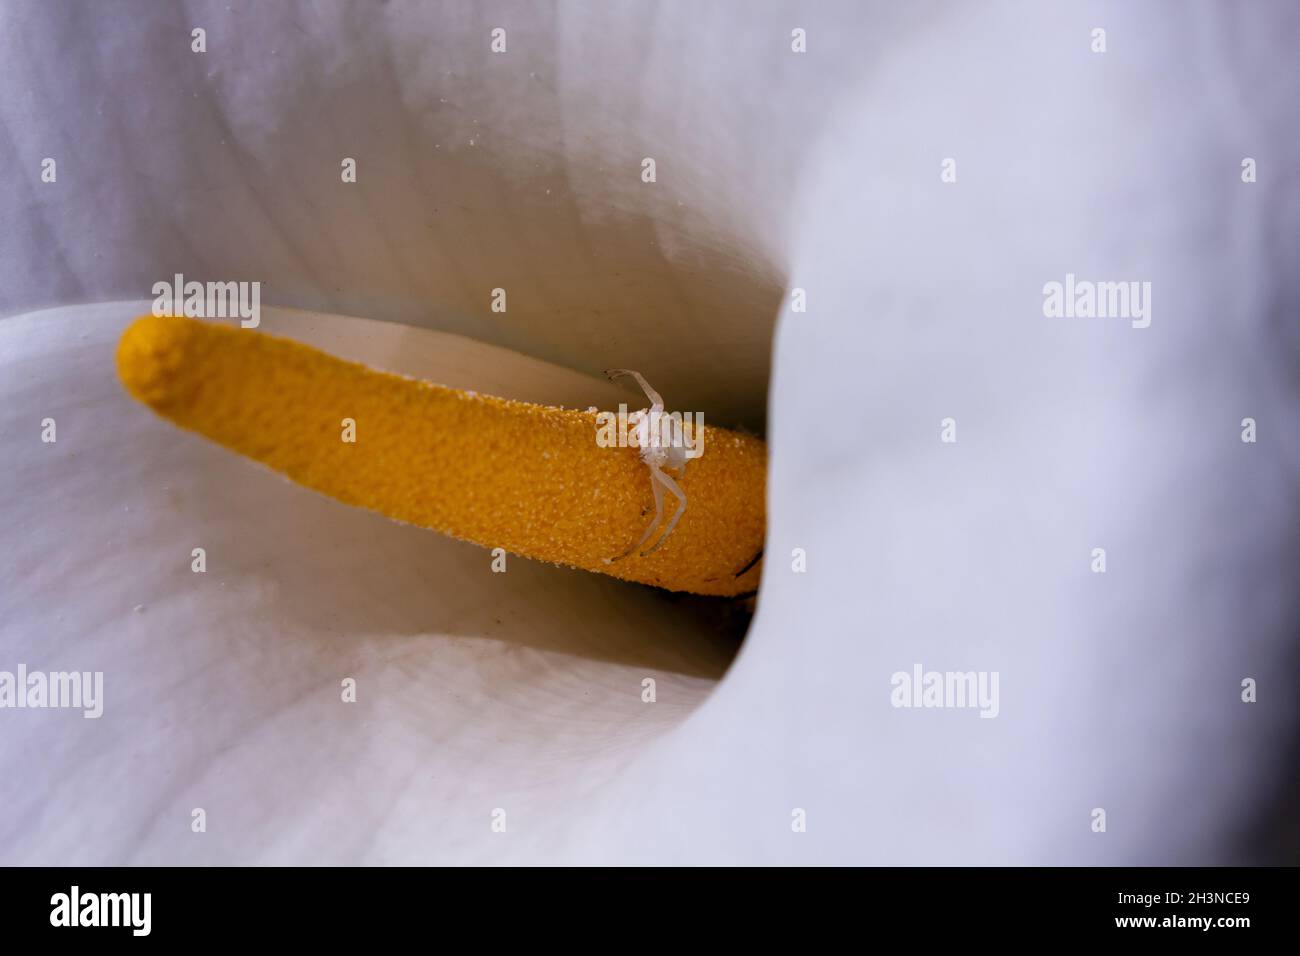 Small white spider waiting for its prey on the yellow stamen of Arum lily flower. Stock Photo